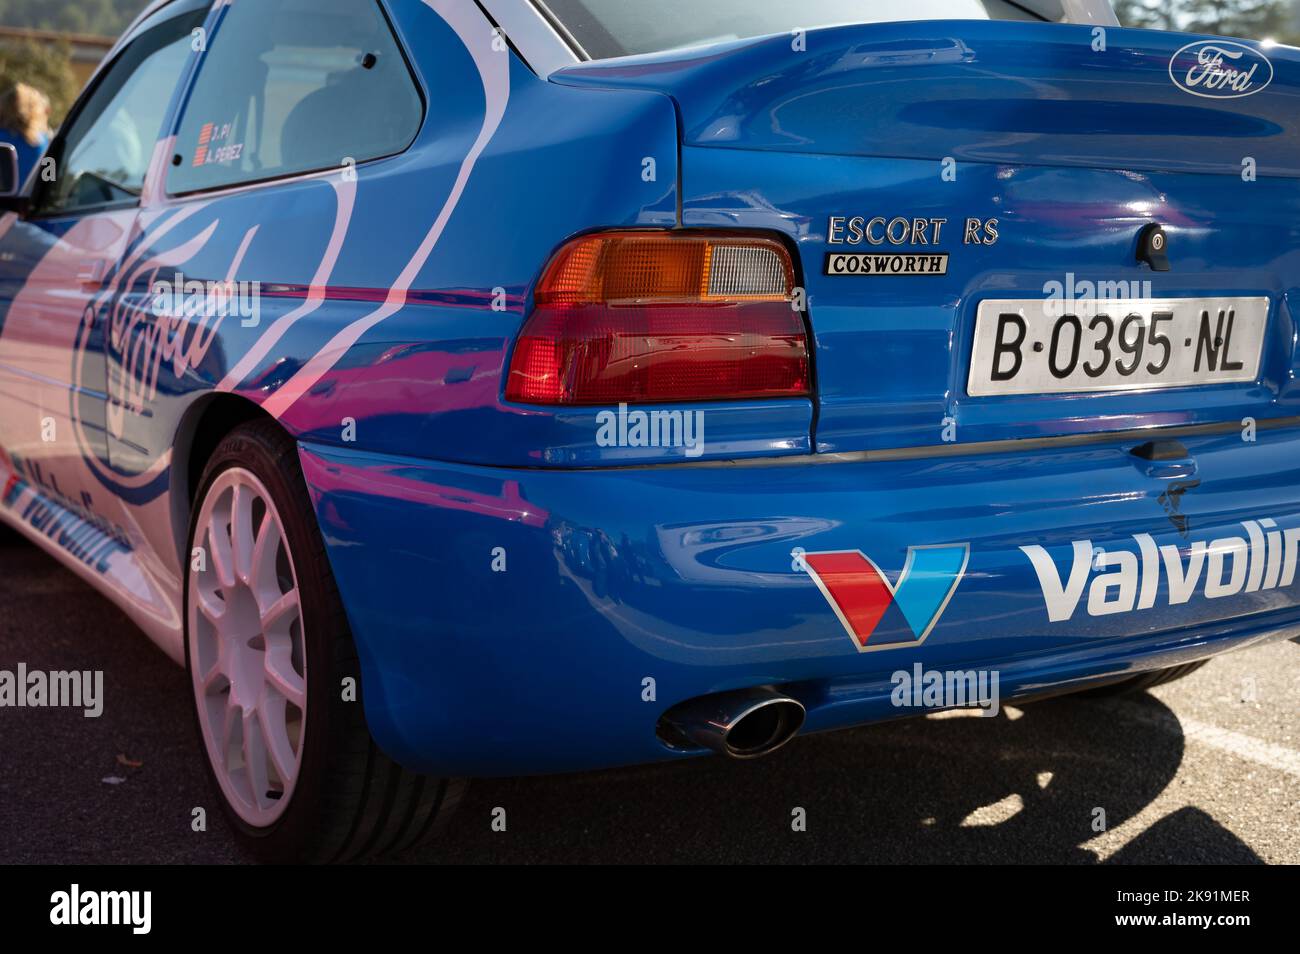 The Ford Escort mk5 Cosworth rally car with Valvoline sponsor. Stock Photo